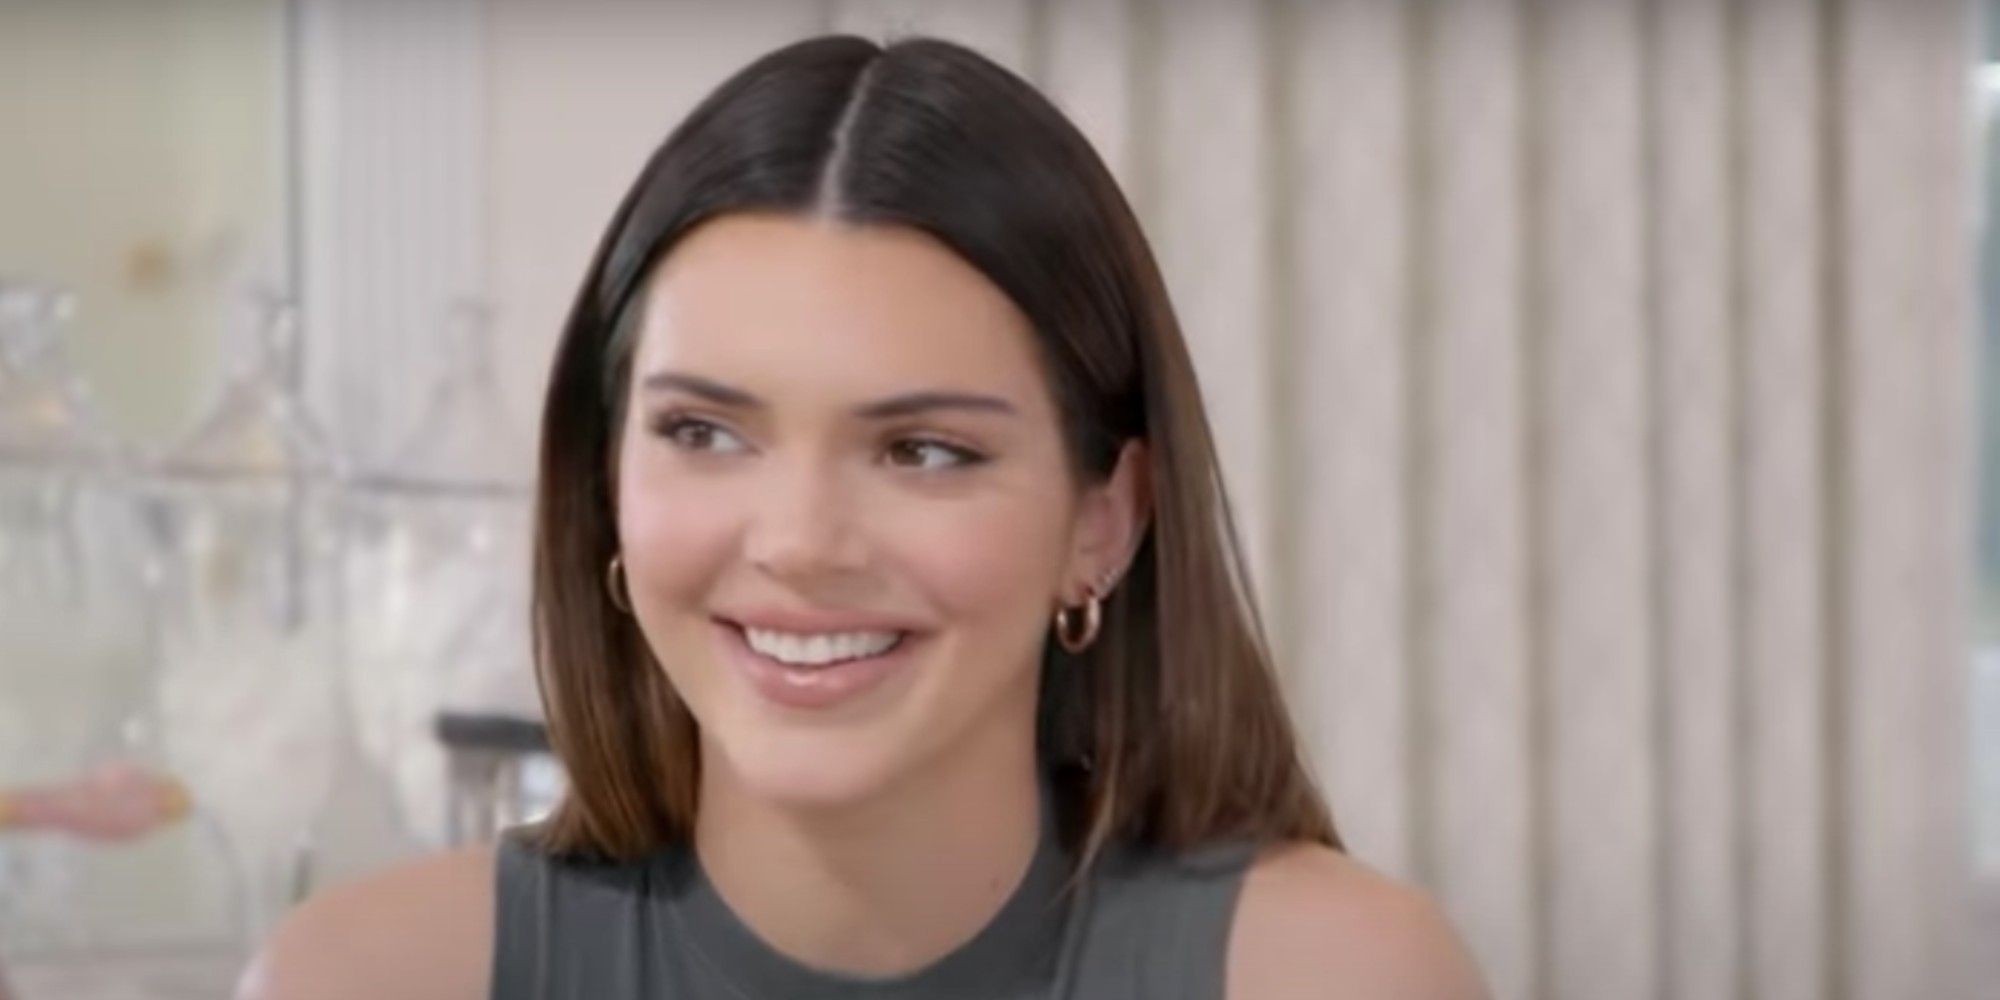 Kendall Jenner on Keeping Up With the Kardashians